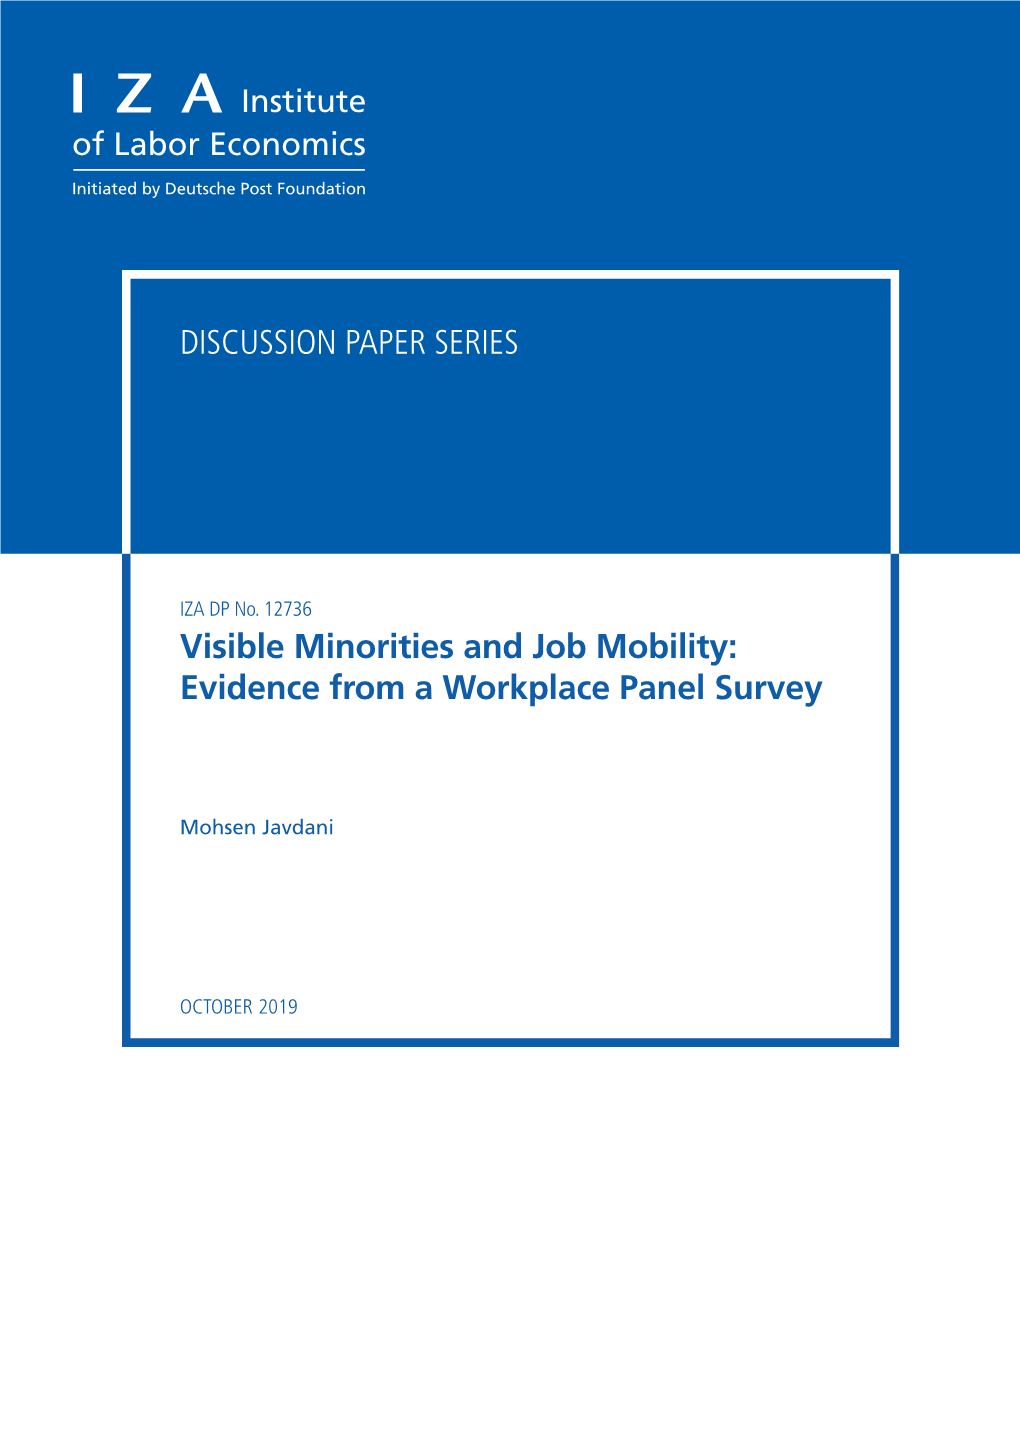 Visible Minorities and Job Mobility: Evidence from a Workplace Panel Survey